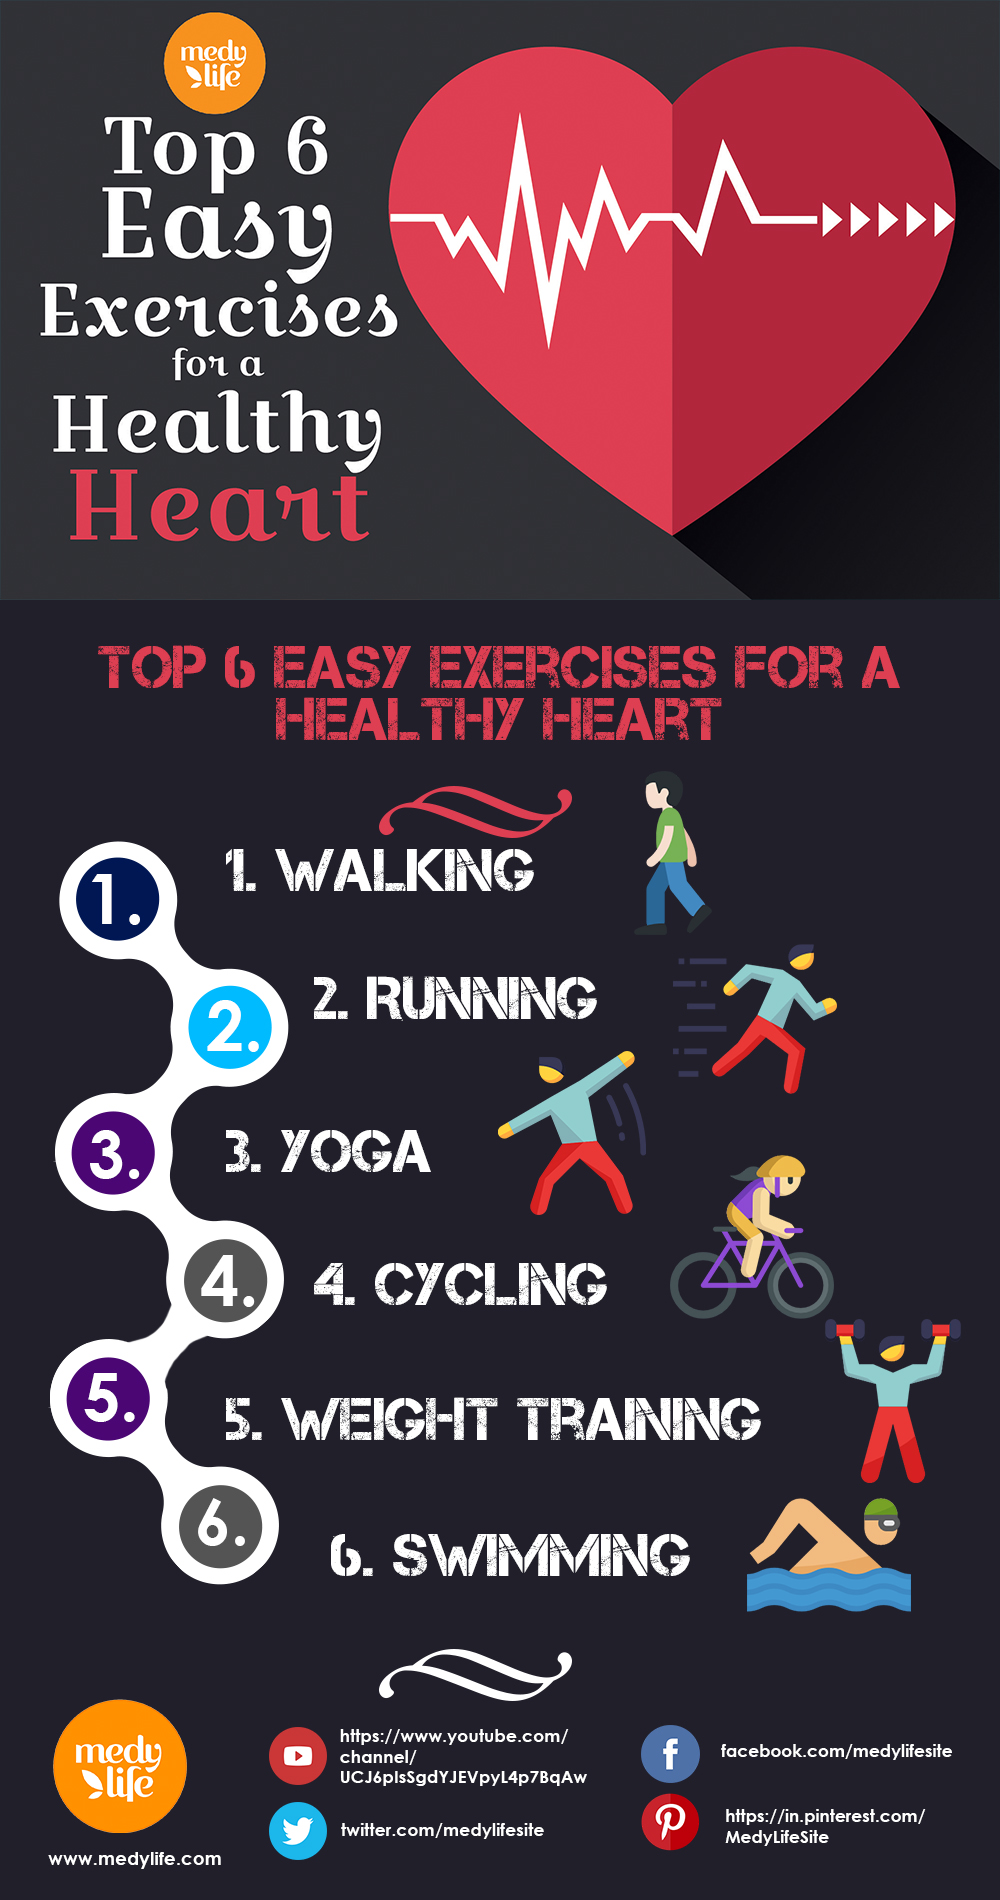 Top 6 Easy Exercises for a Healthy Heart INFO